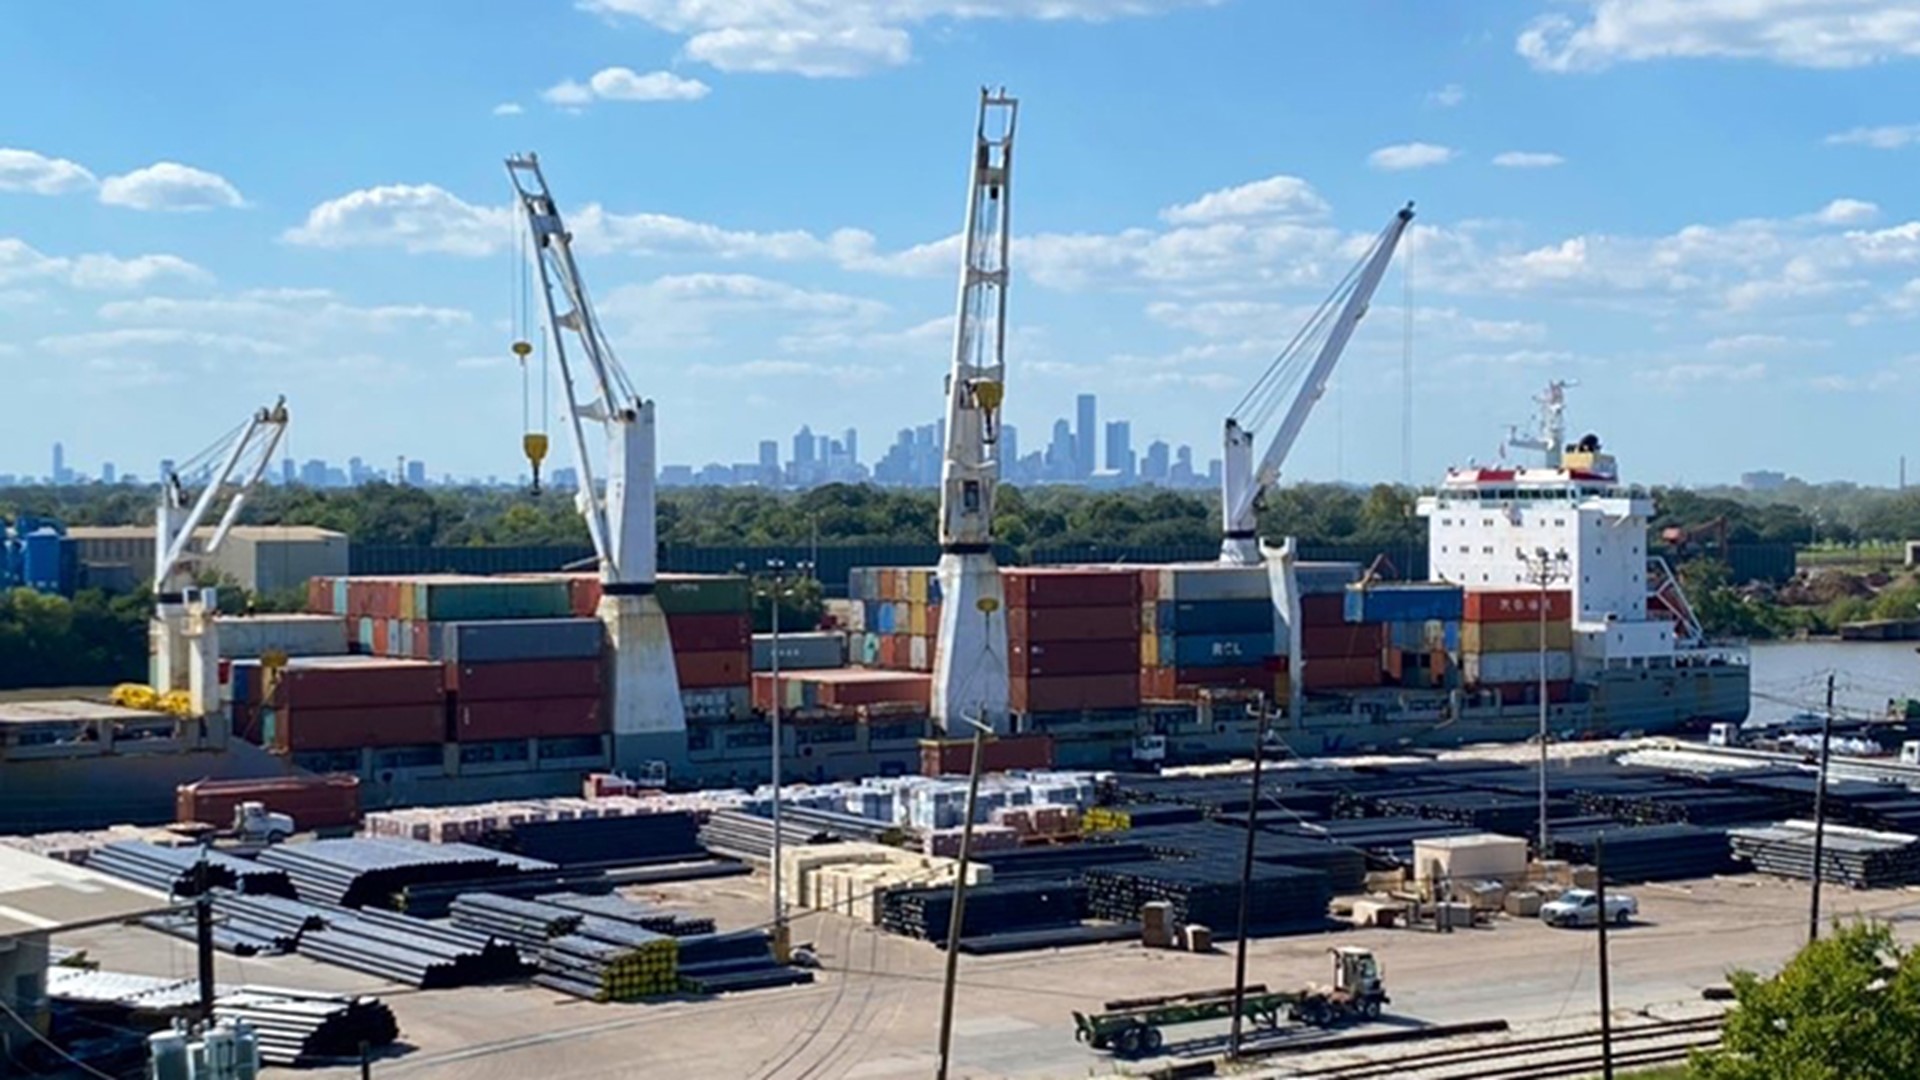 A shortage of drivers and trucks has caused backups nationwide and some big-box retailers are now using the Houston port as an alternative.